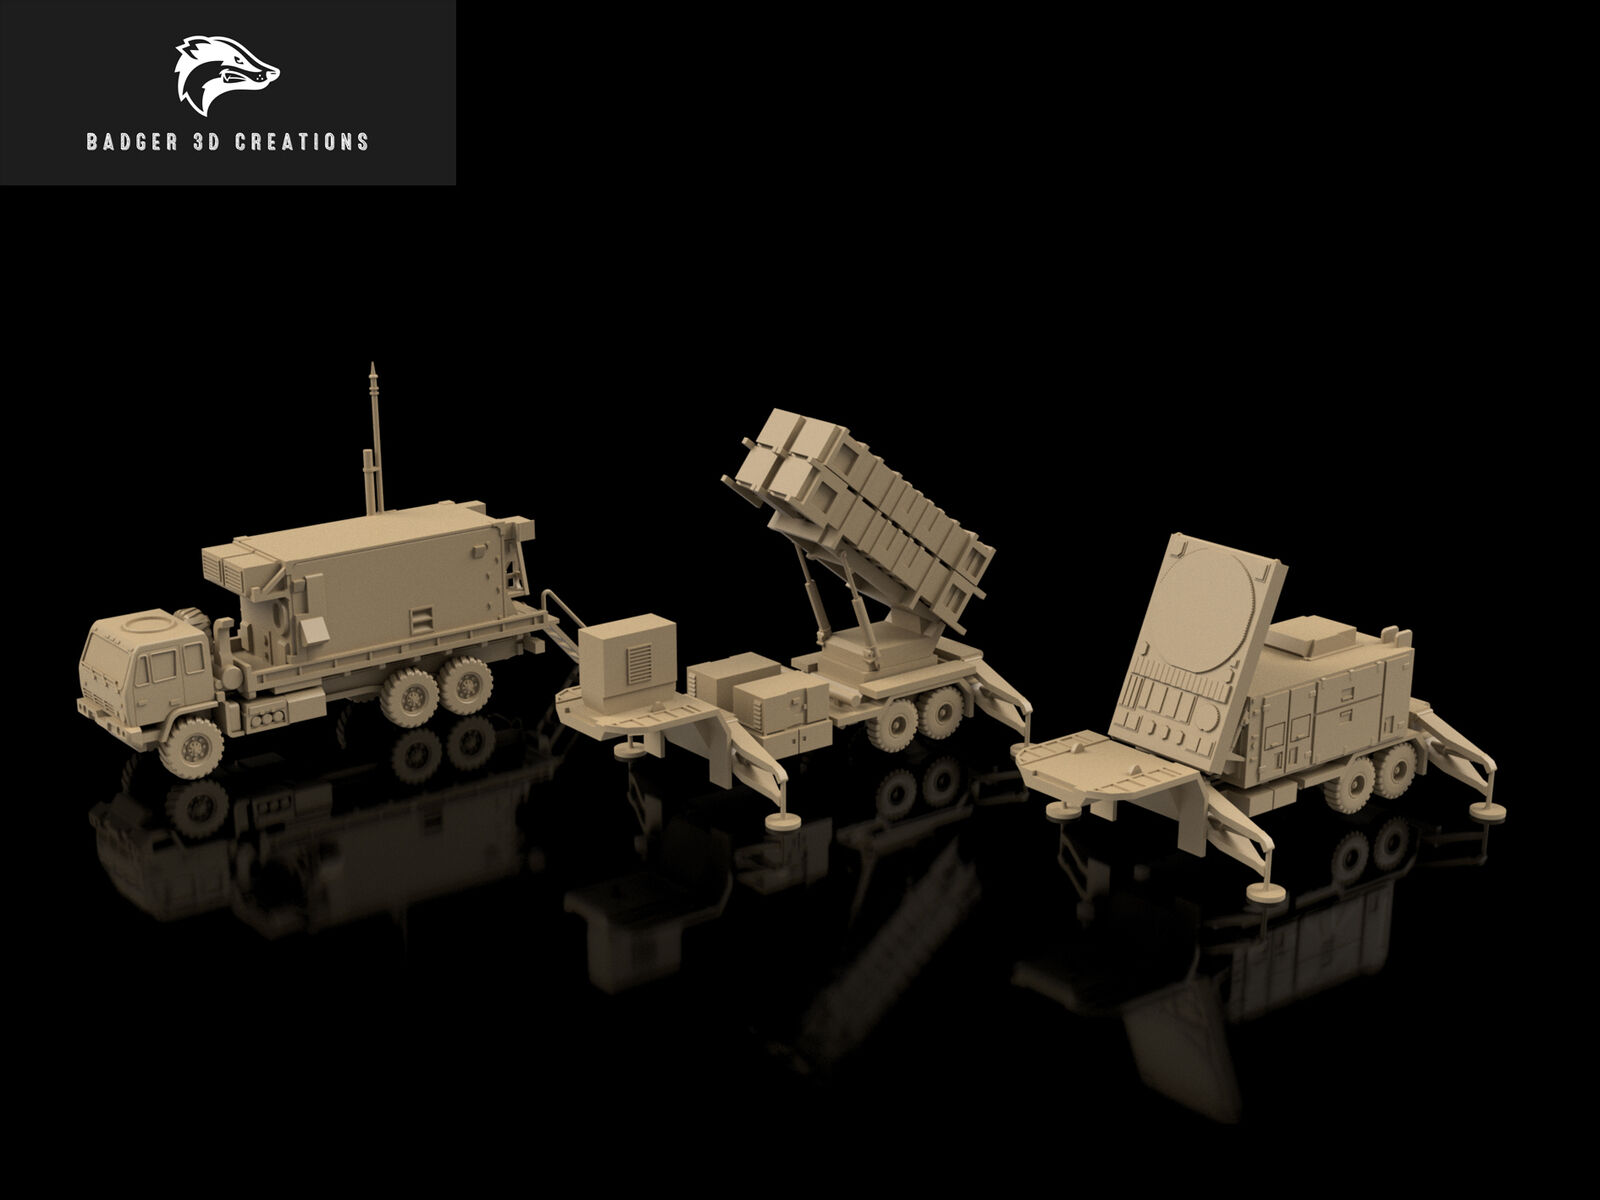 American MIM-104 Patriot Missile System - Modern Warfare/Wargames - Picture 2 of 8